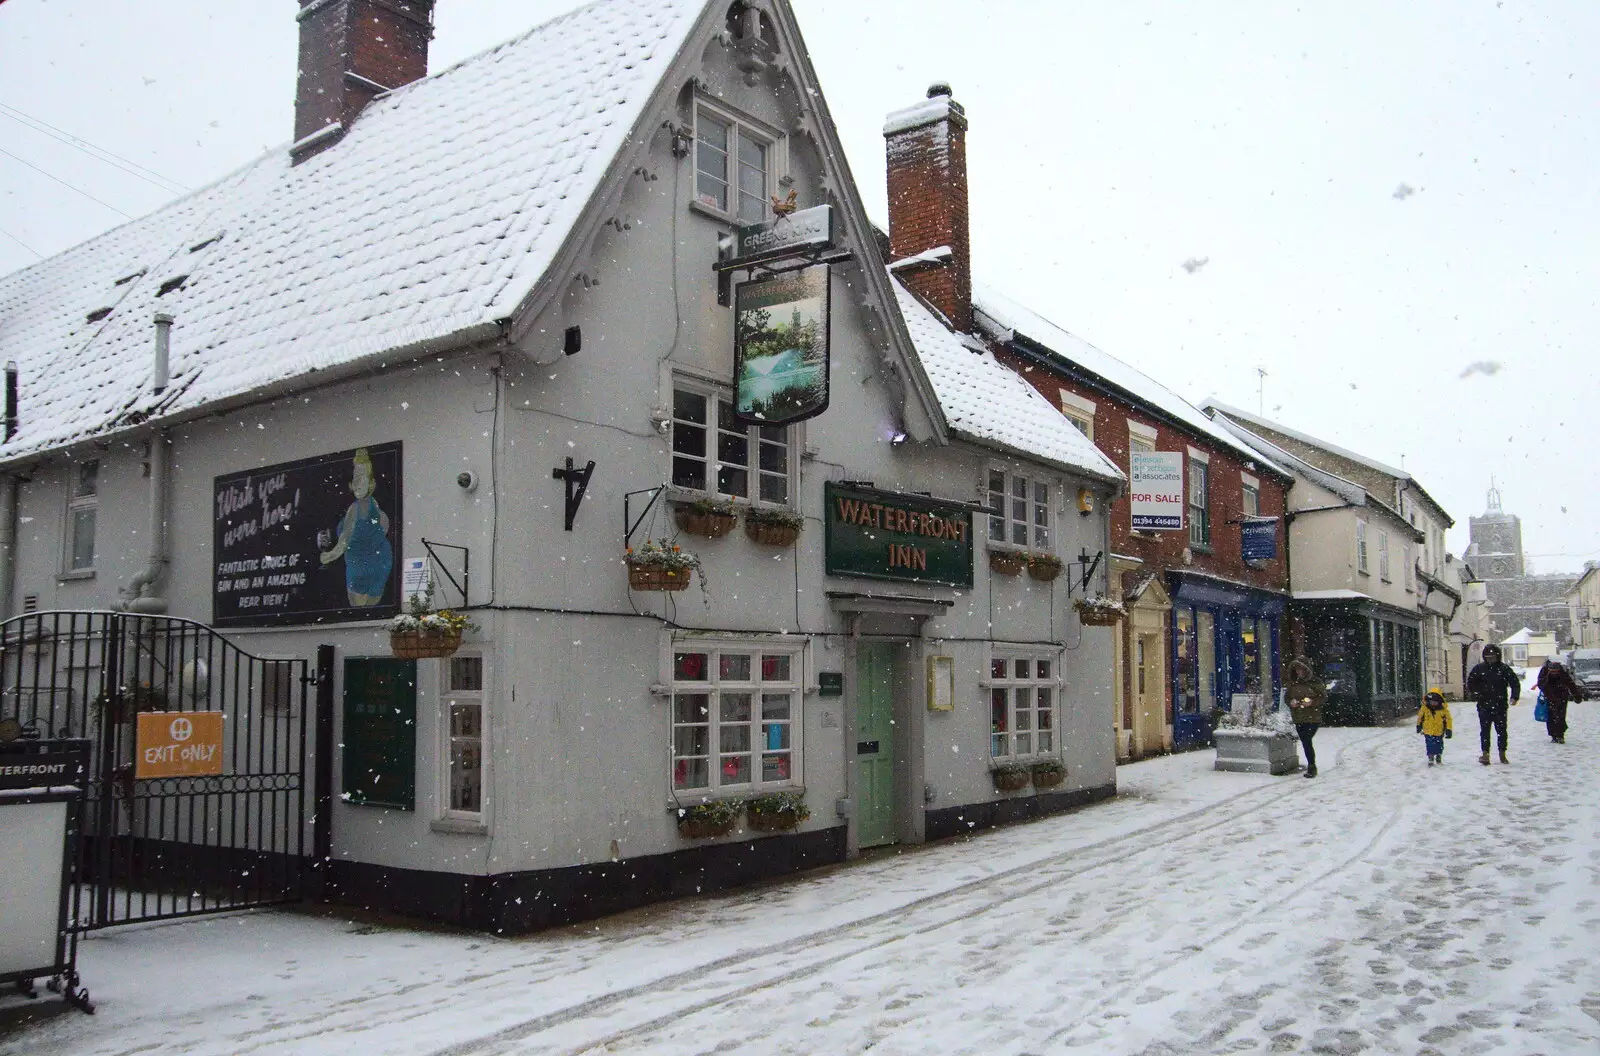 The Waterfront Inn, from A Snowy Morning, Diss, Norfolk - 16th January 2021